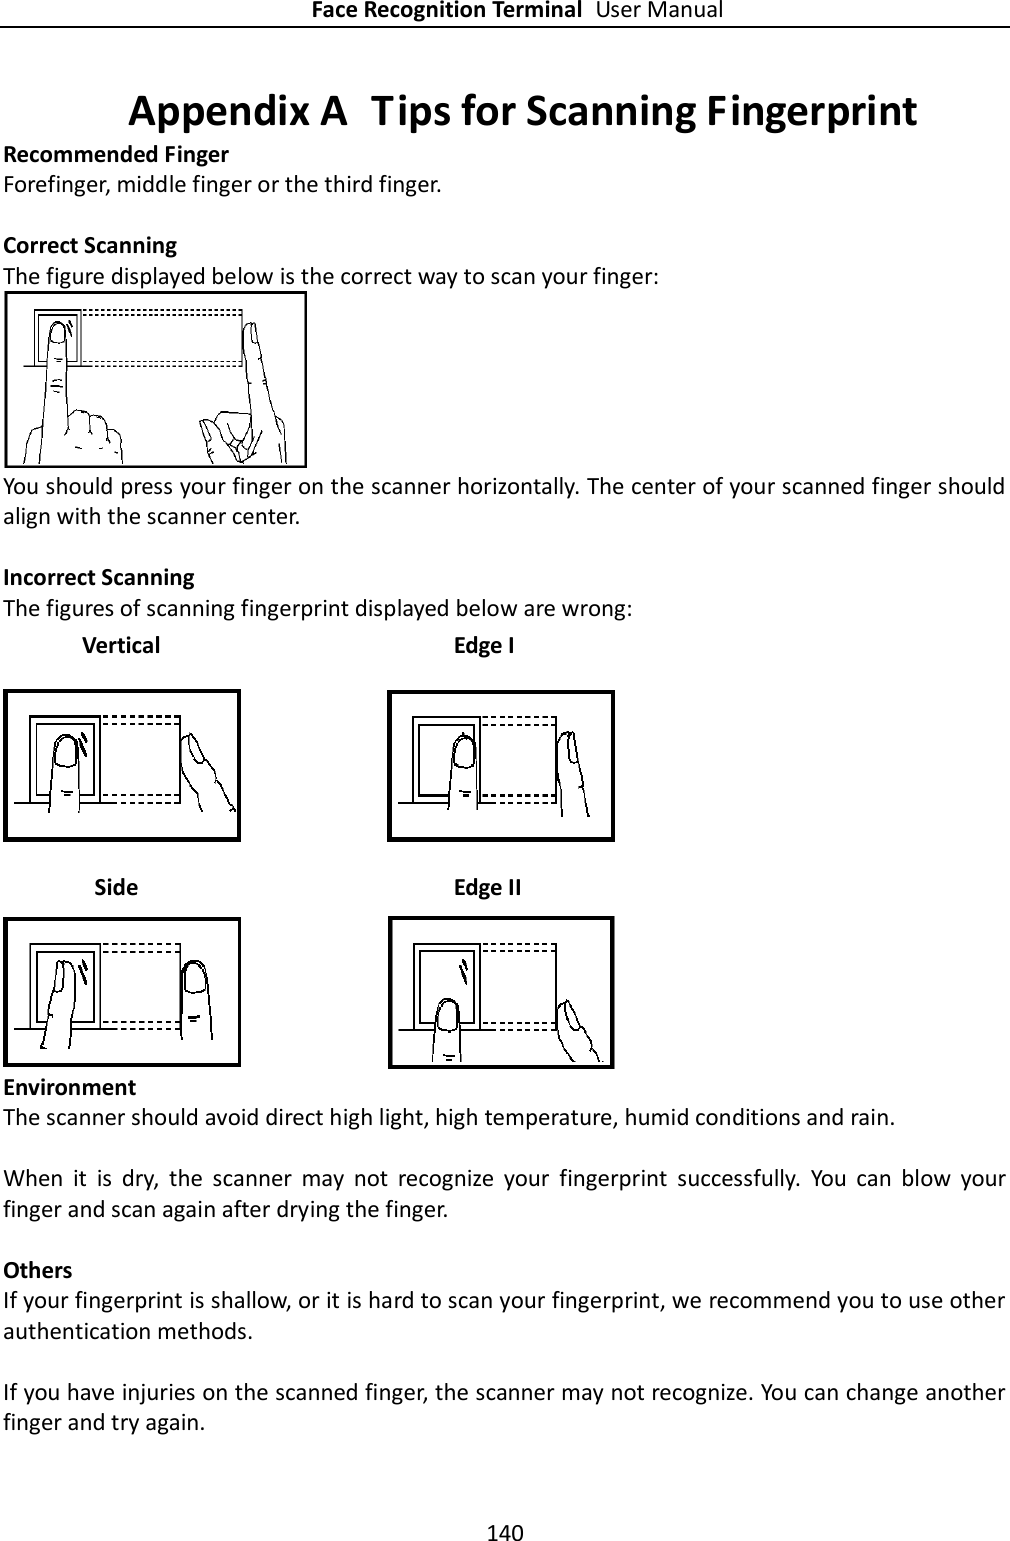 Face Recognition Terminal User Manual 140  Appendix A  Tips for Scanning Fingerprint Recommended Finger Forefinger, middle finger or the third finger.  Correct Scanning The figure displayed below is the correct way to scan your finger:  You should press your finger on the scanner horizontally. The center of your scanned finger should align with the scanner center.  Incorrect Scanning The figures of scanning fingerprint displayed below are wrong:  Environment The scanner should avoid direct high light, high temperature, humid conditions and rain.    When  it  is  dry,  the  scanner  may  not  recognize  your  fingerprint  successfully.  You  can  blow  your finger and scan again after drying the finger.  Others If your fingerprint is shallow, or it is hard to scan your fingerprint, we recommend you to use other authentication methods.  If you have injuries on the scanned finger, the scanner may not recognize. You can change another finger and try again. Side  Edge II Vertical Edge I 